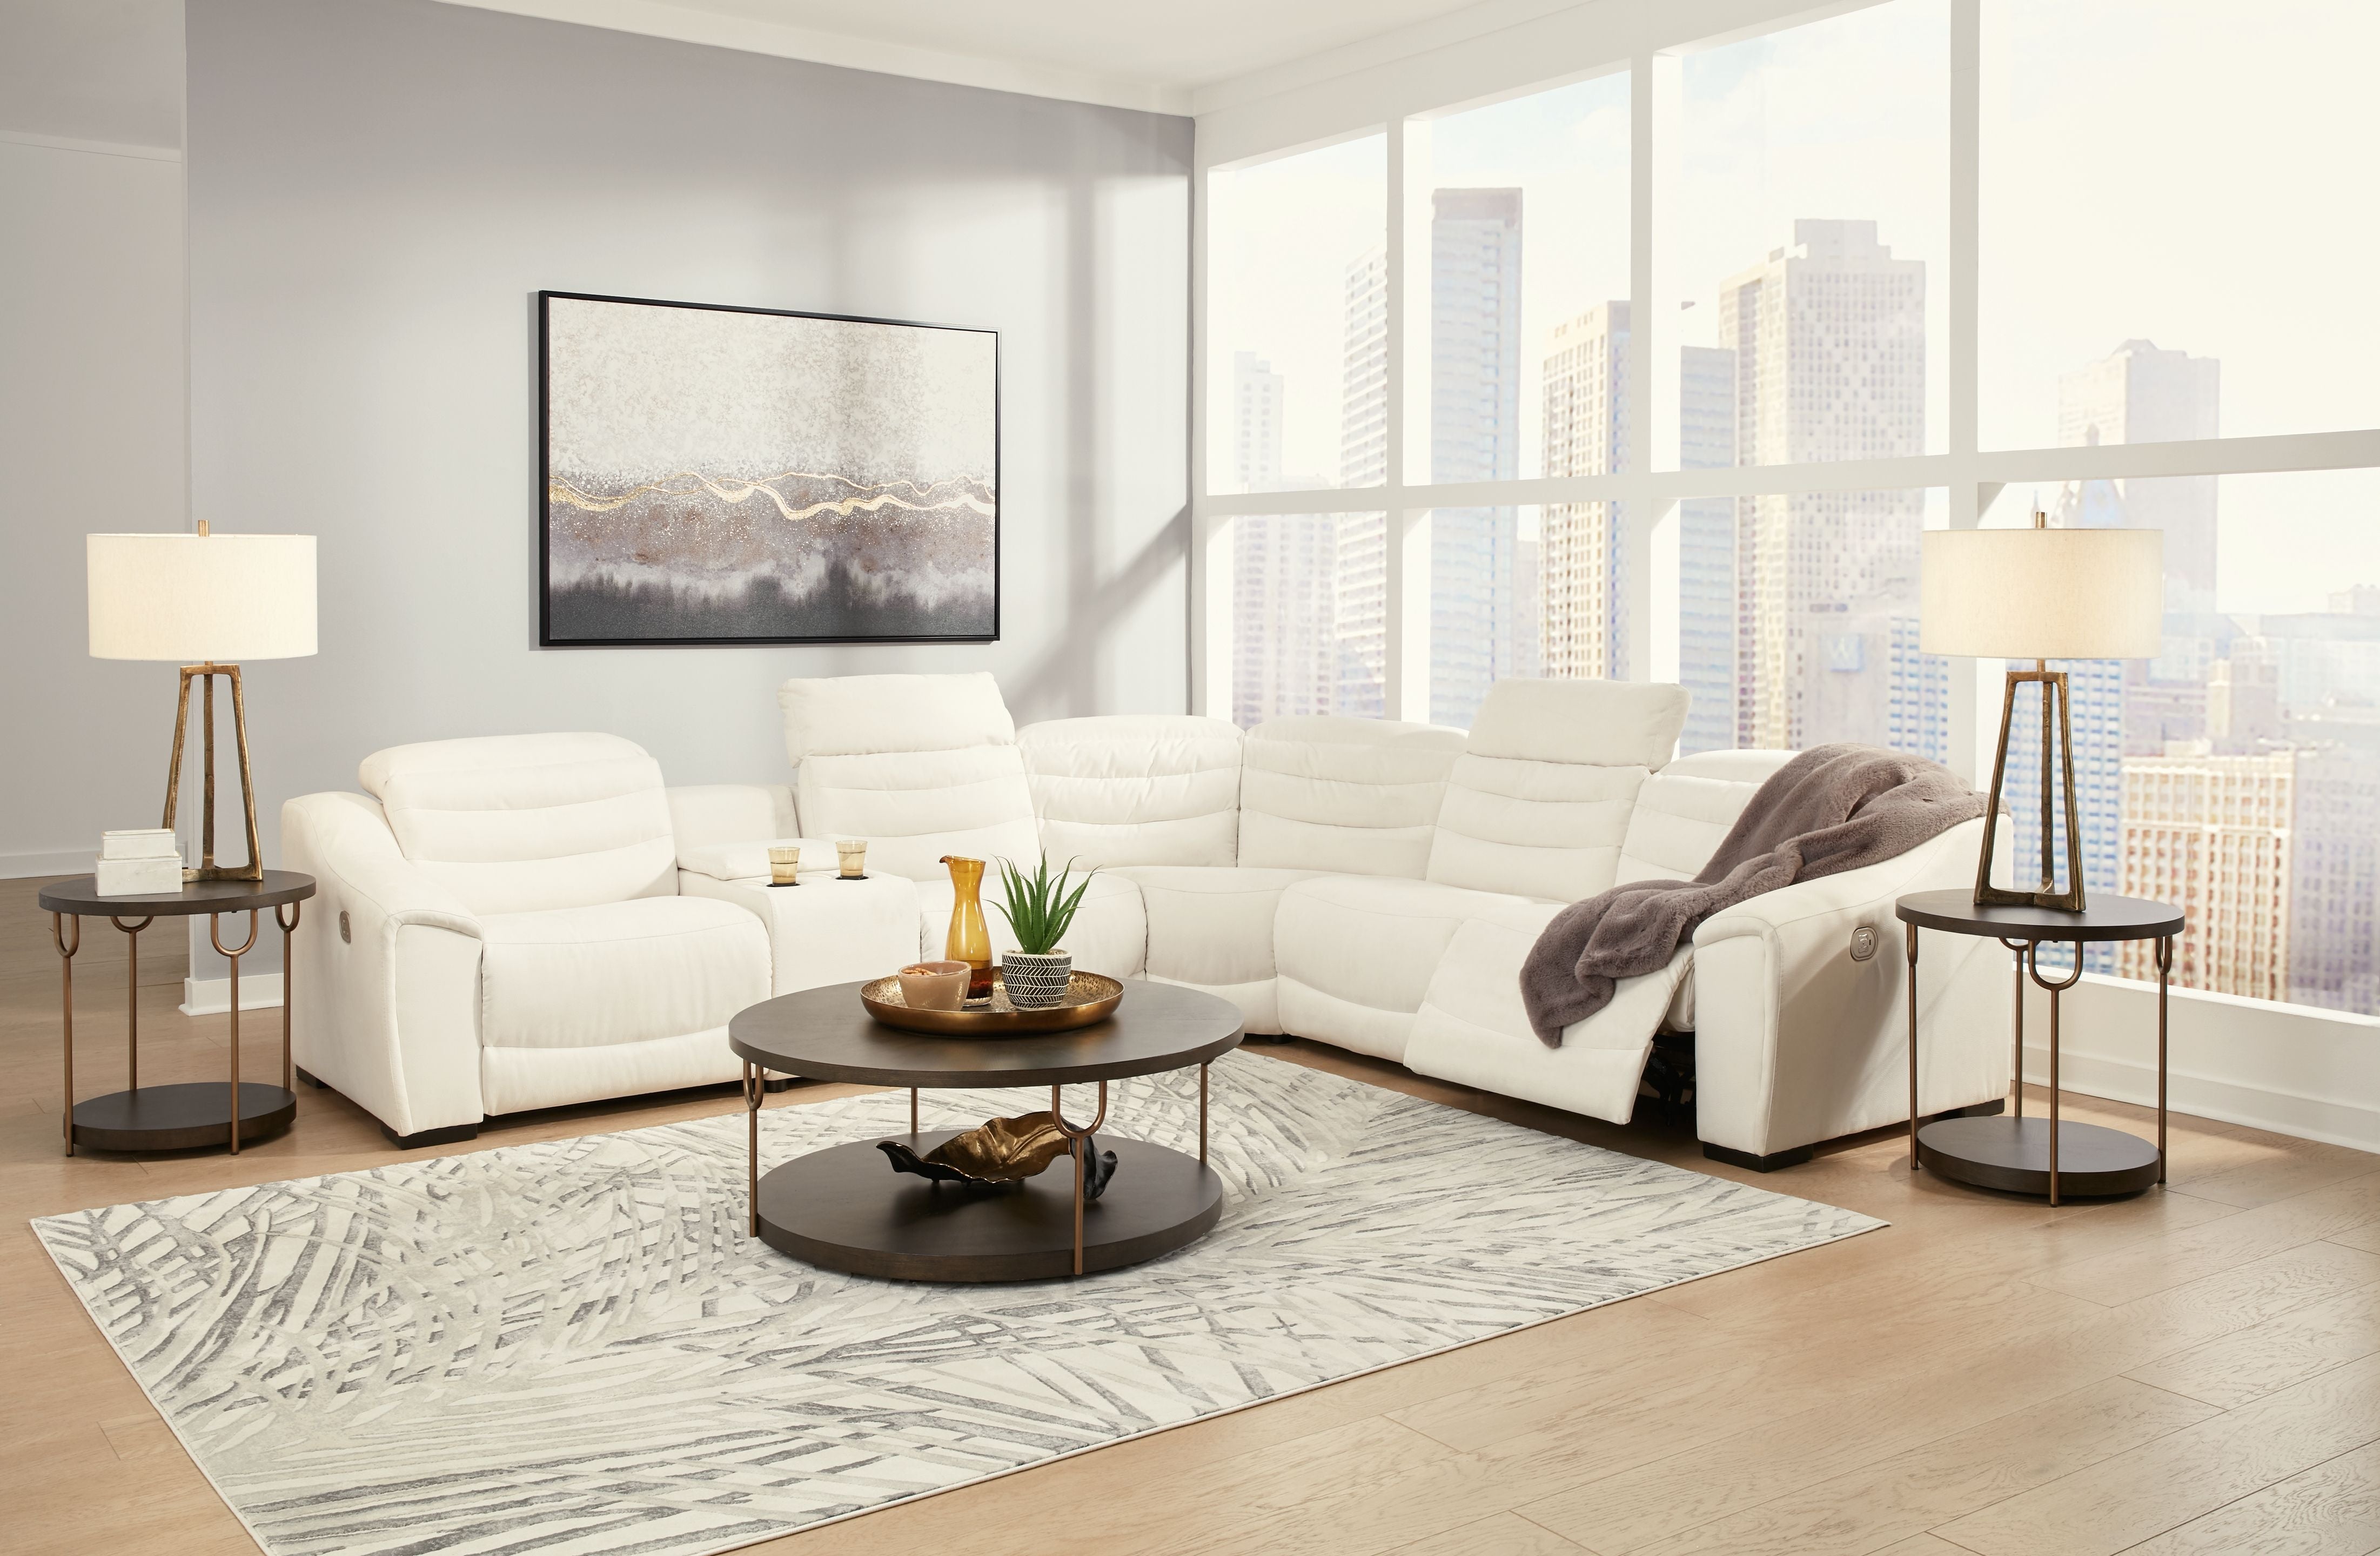 Next-gen White Power Reclining Sectional-Reclining Sectionals-American Furniture Outlet